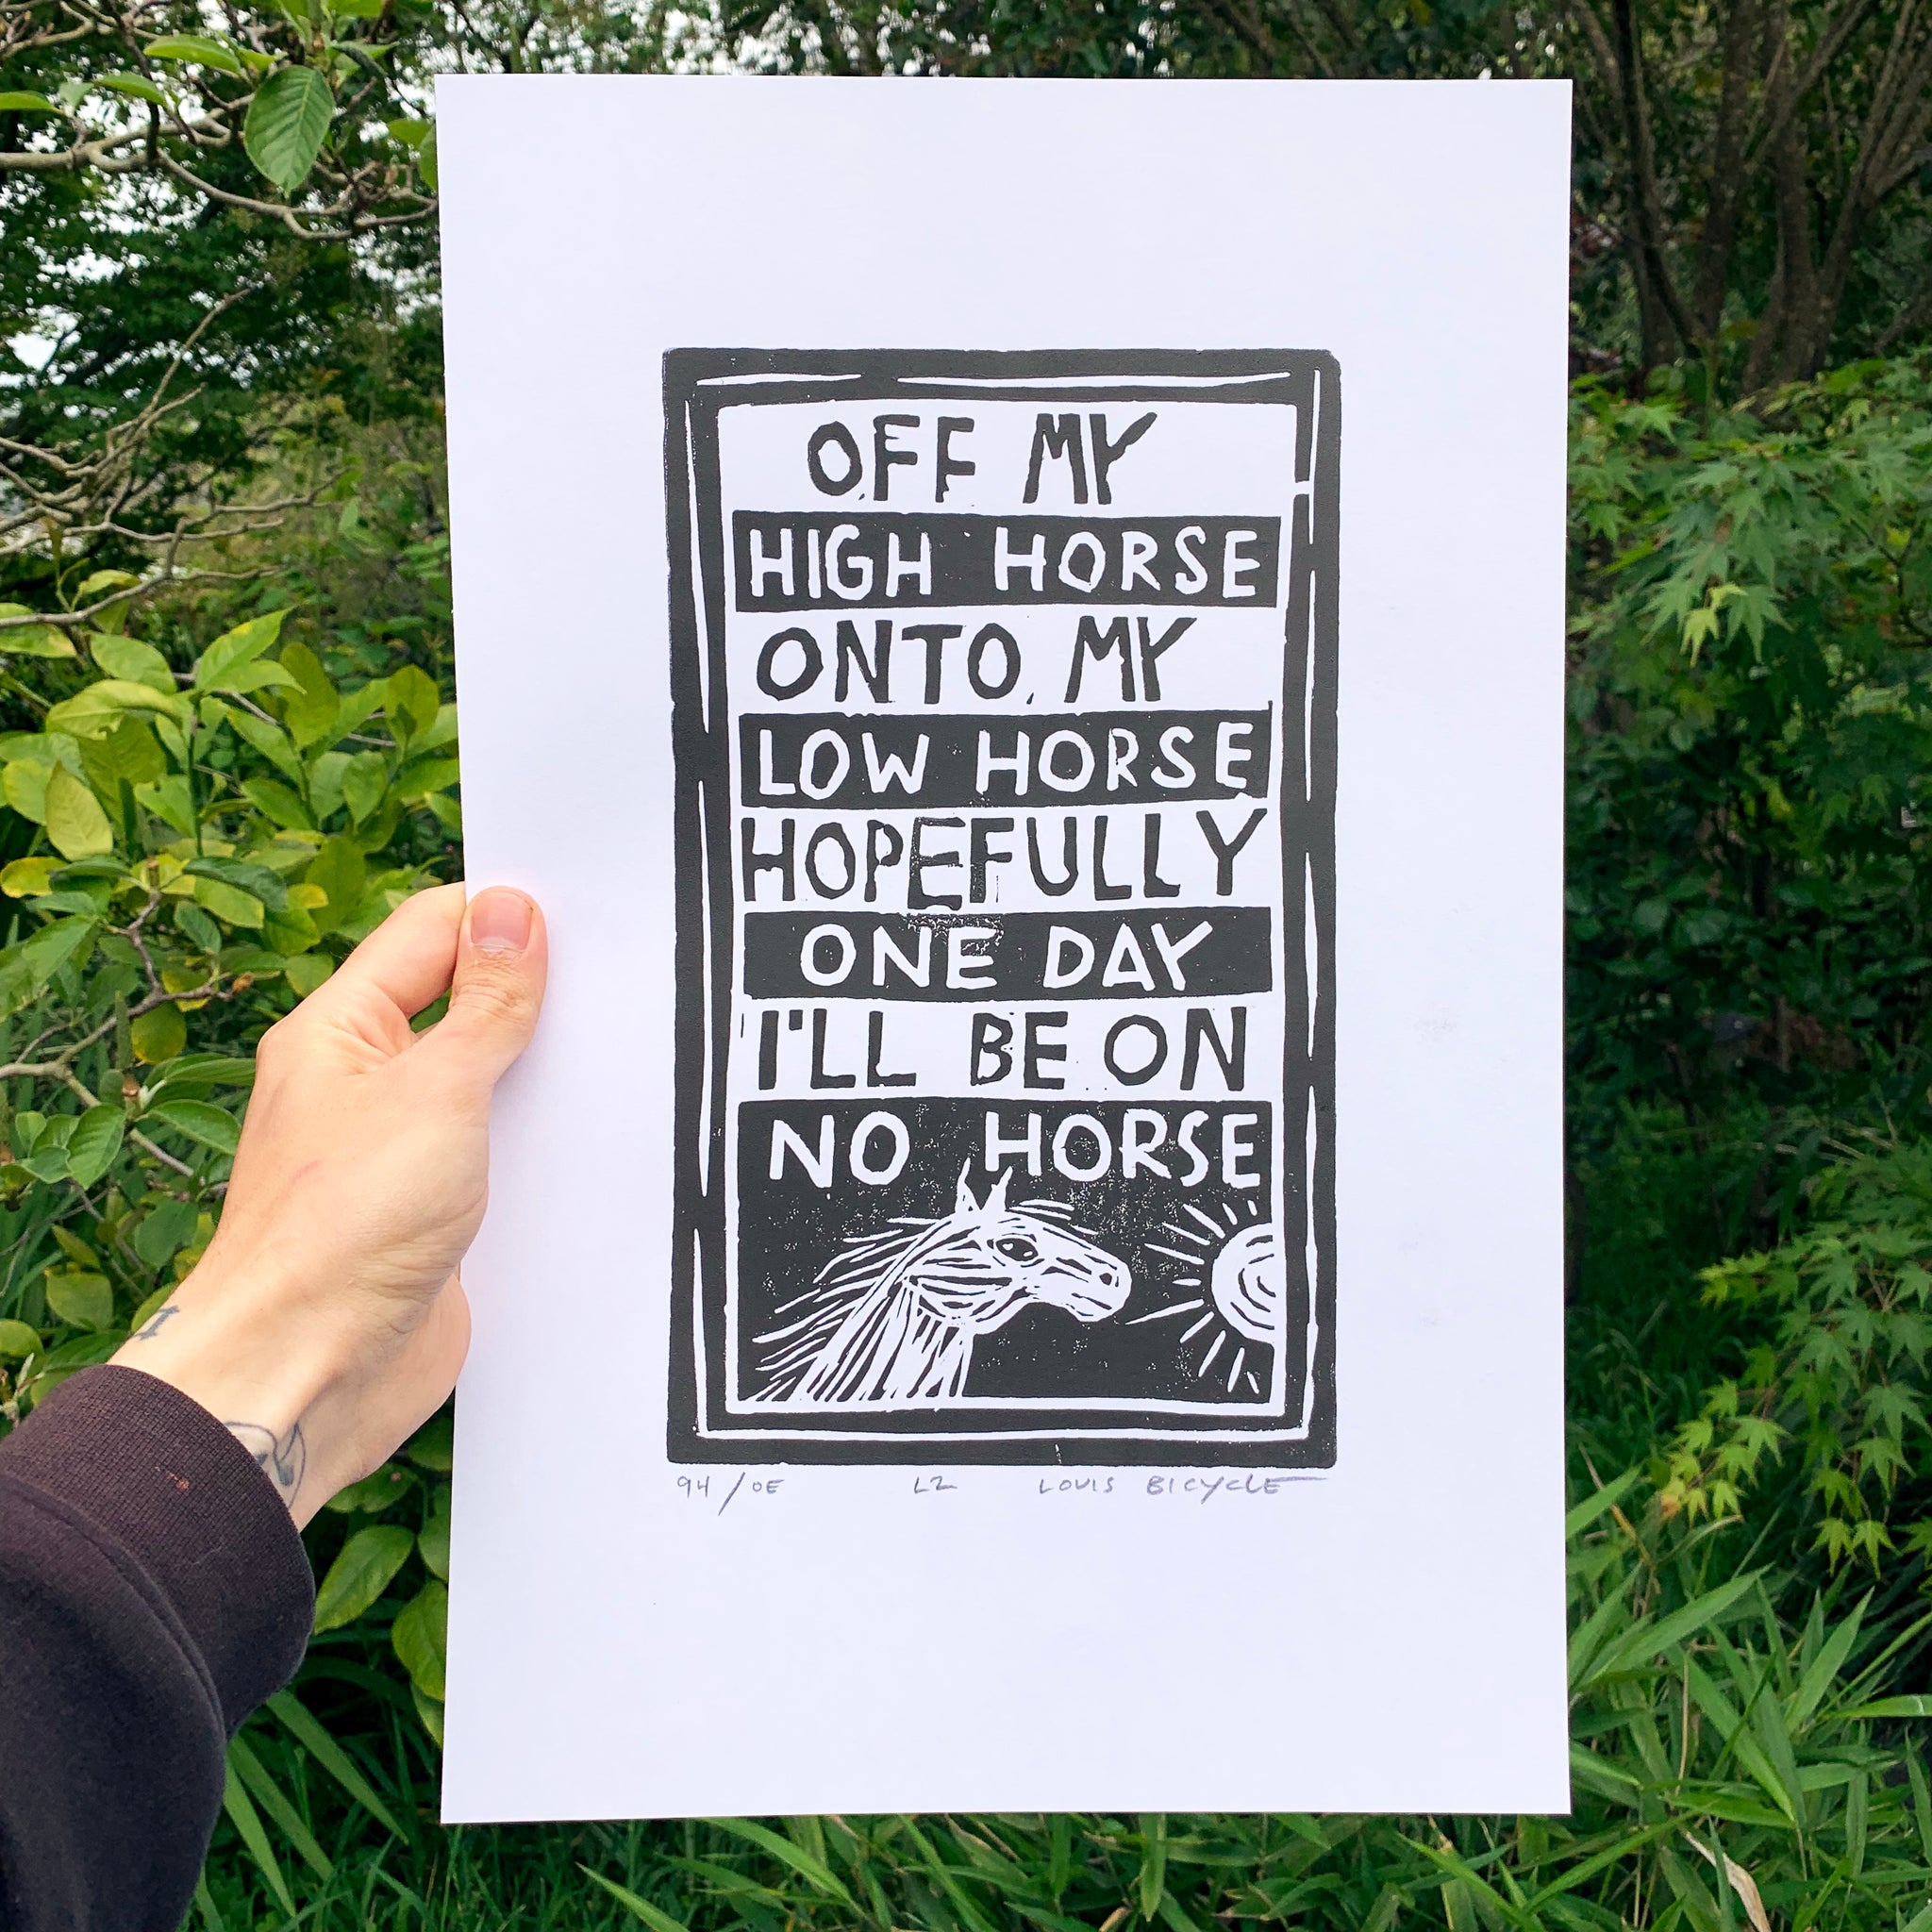 Block printed poster by artist Louis Bicycle. Text "Off my high horse, onto my low horse, hopefully one day, I'll be on no horse."